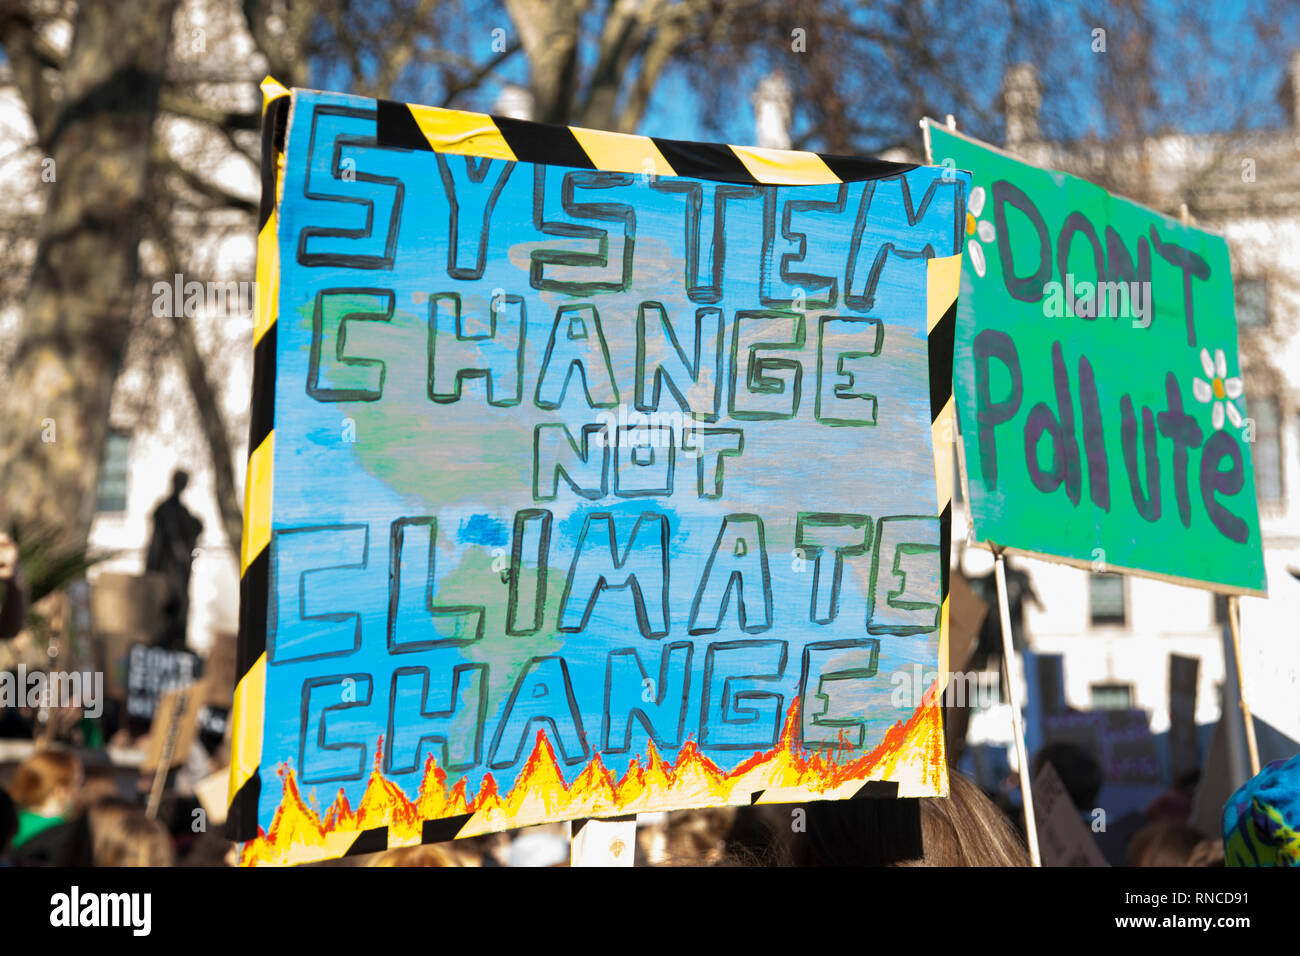 Protestors holding climate change banners at a protest Stock Photo